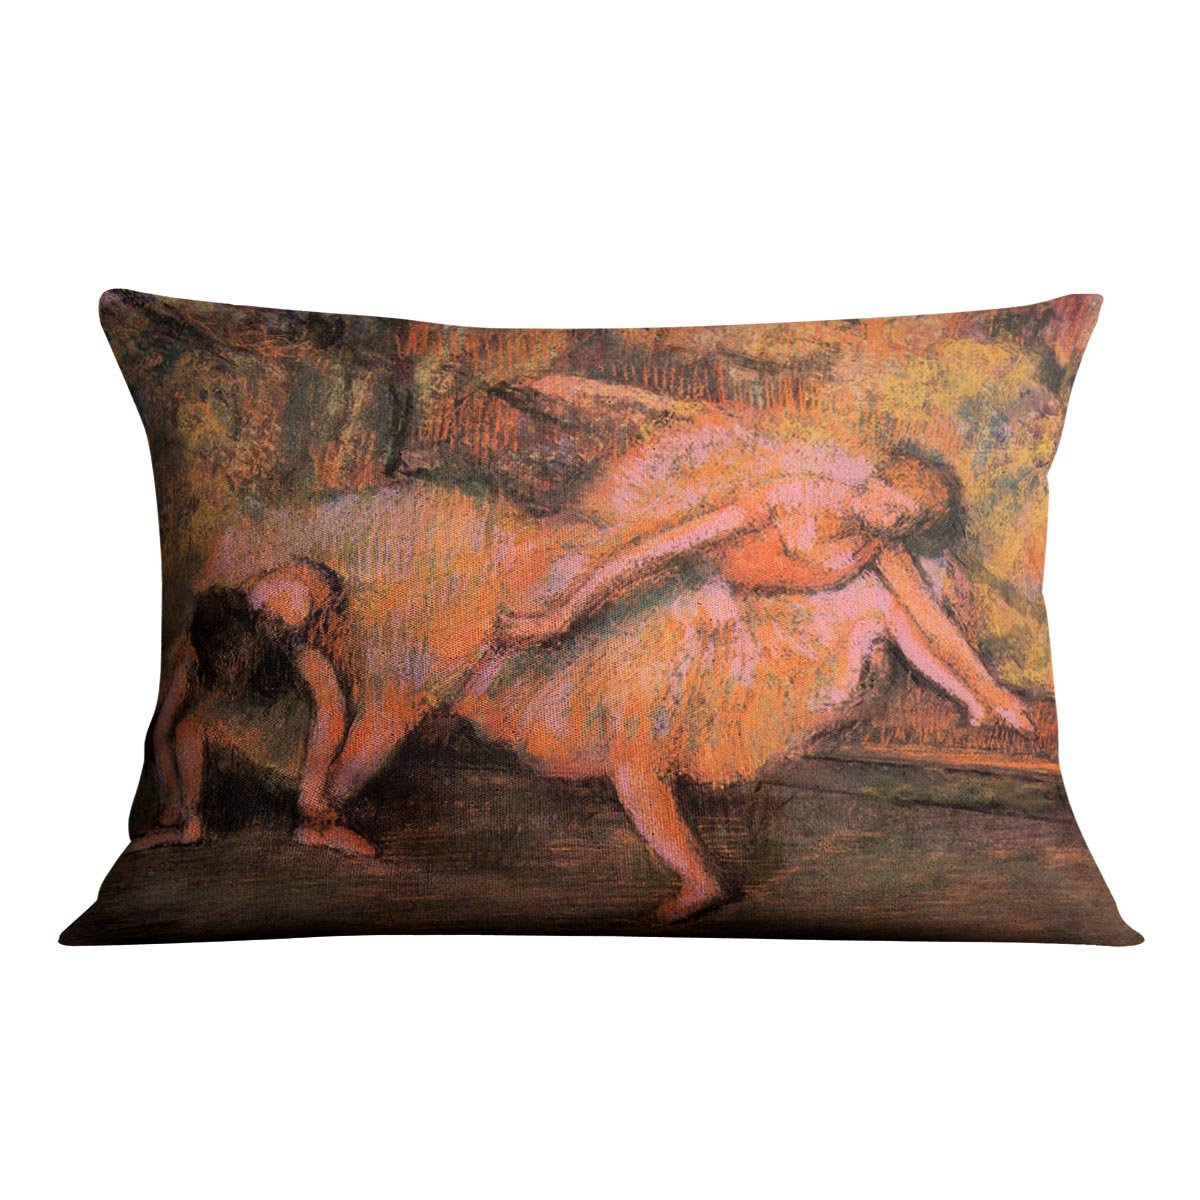 Two dancers on a bank by Degas Cushion